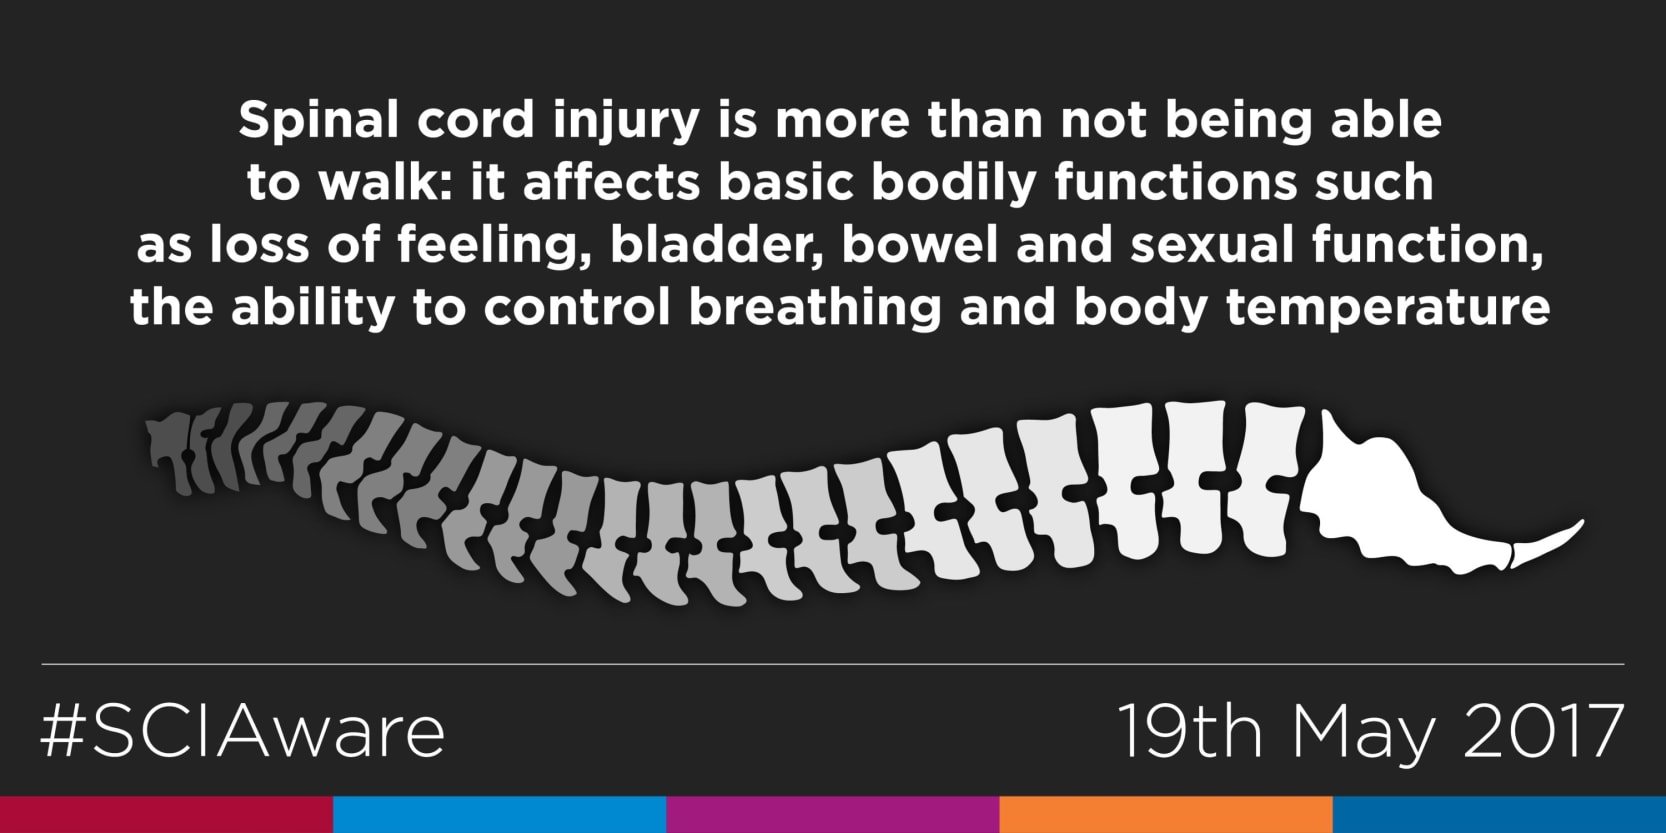 Effects of spinal cord injury